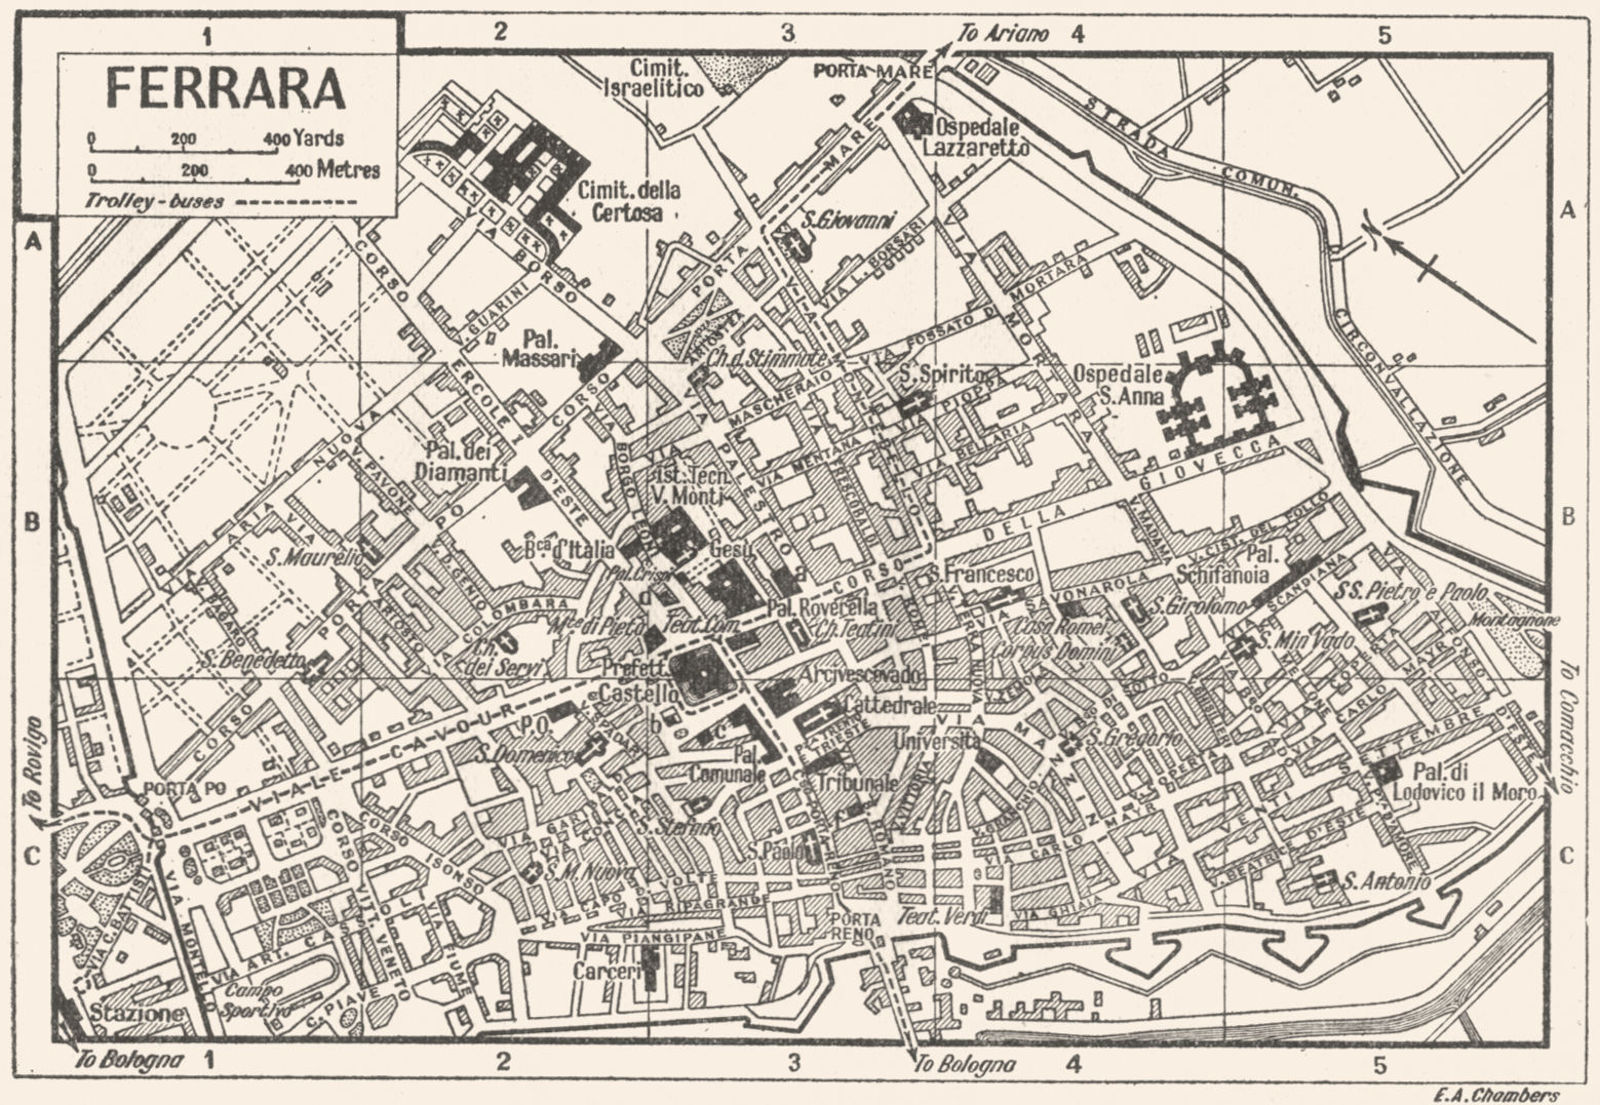 Associate Product FERRARA town/city plan. Italy 1953 old vintage map chart